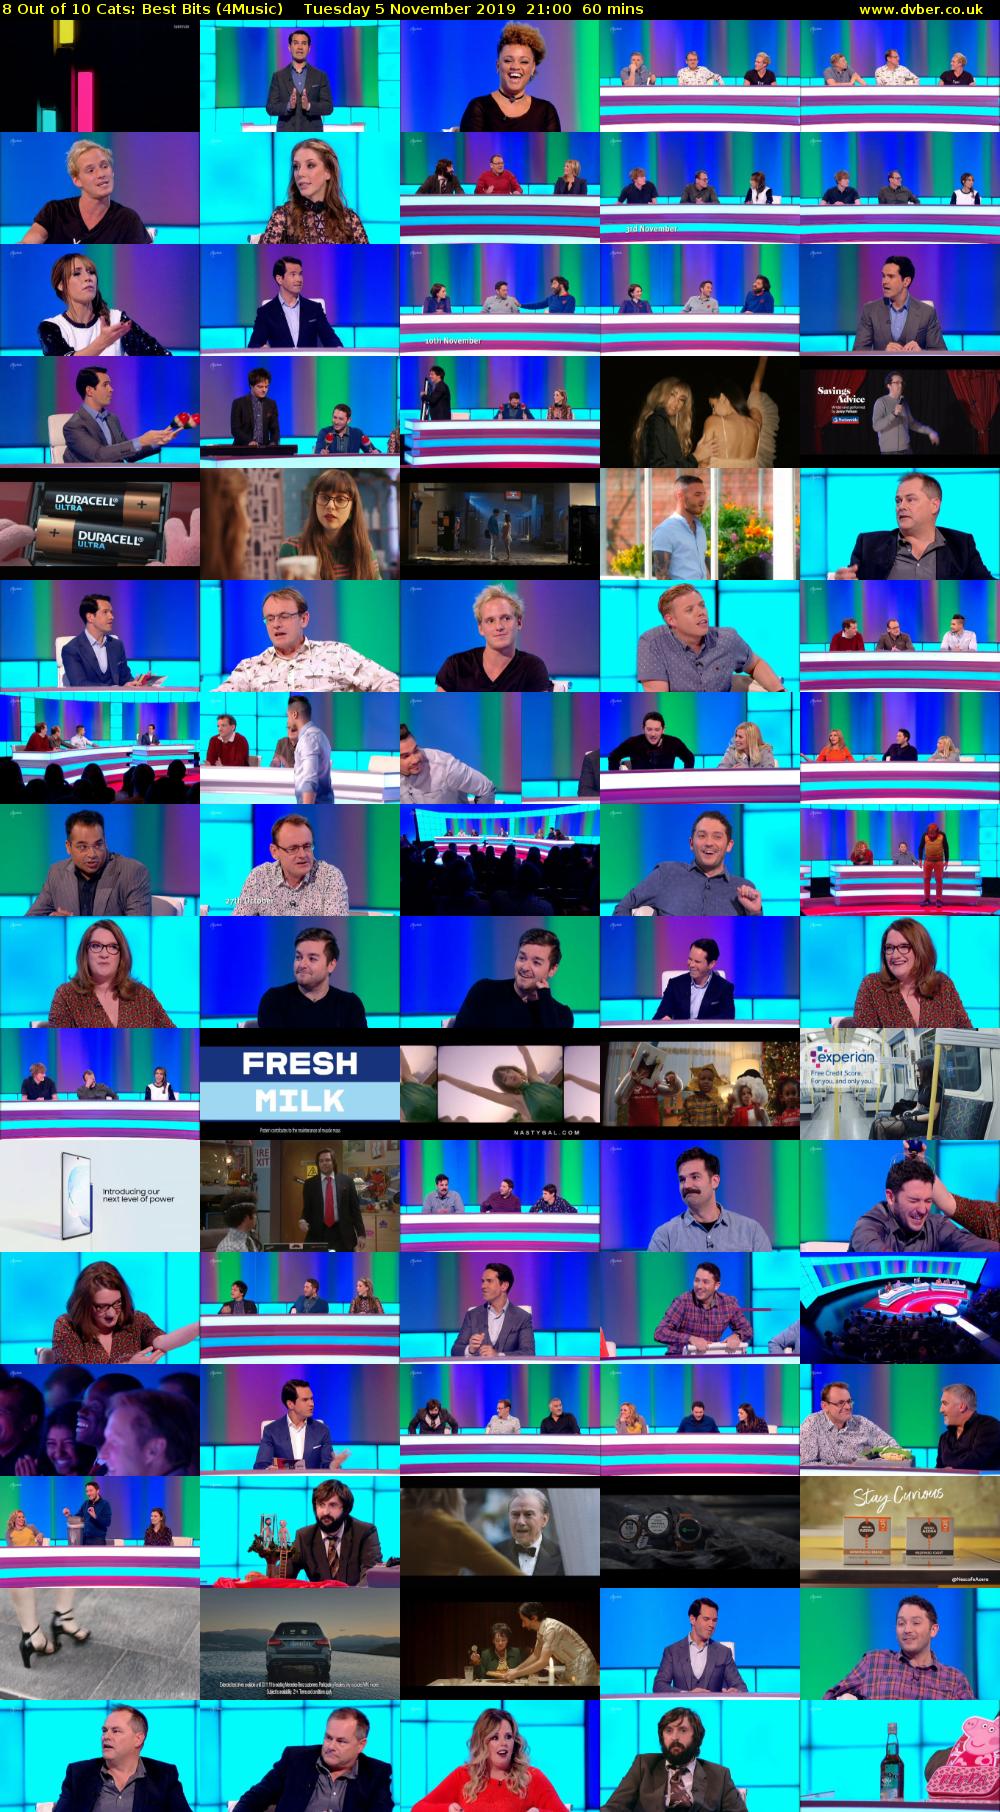 8 Out of 10 Cats: Best Bits (4Music) Tuesday 5 November 2019 21:00 - 22:00